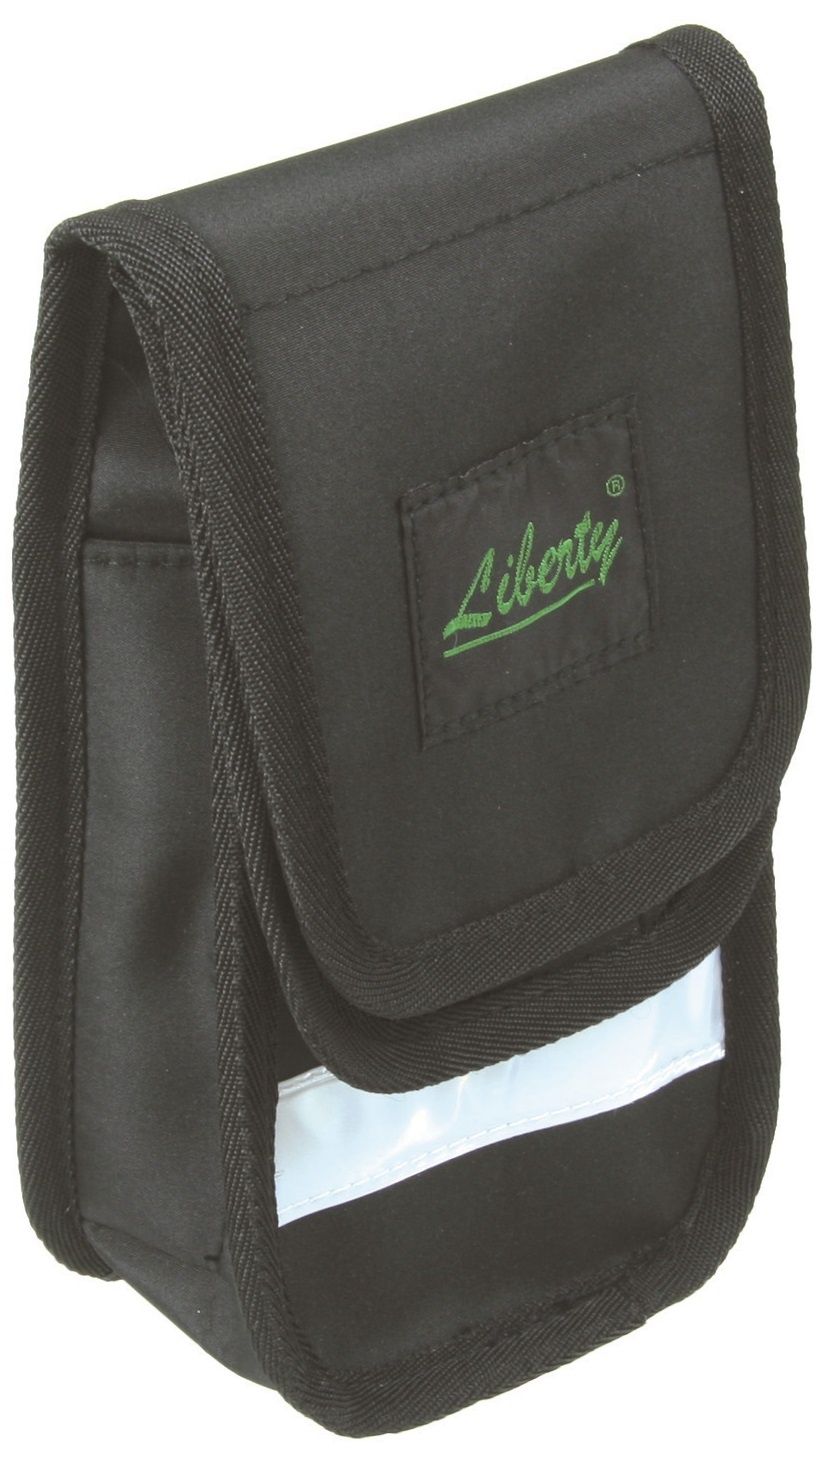 Paramedic Pouch for Stethoscope and Equipment image 0